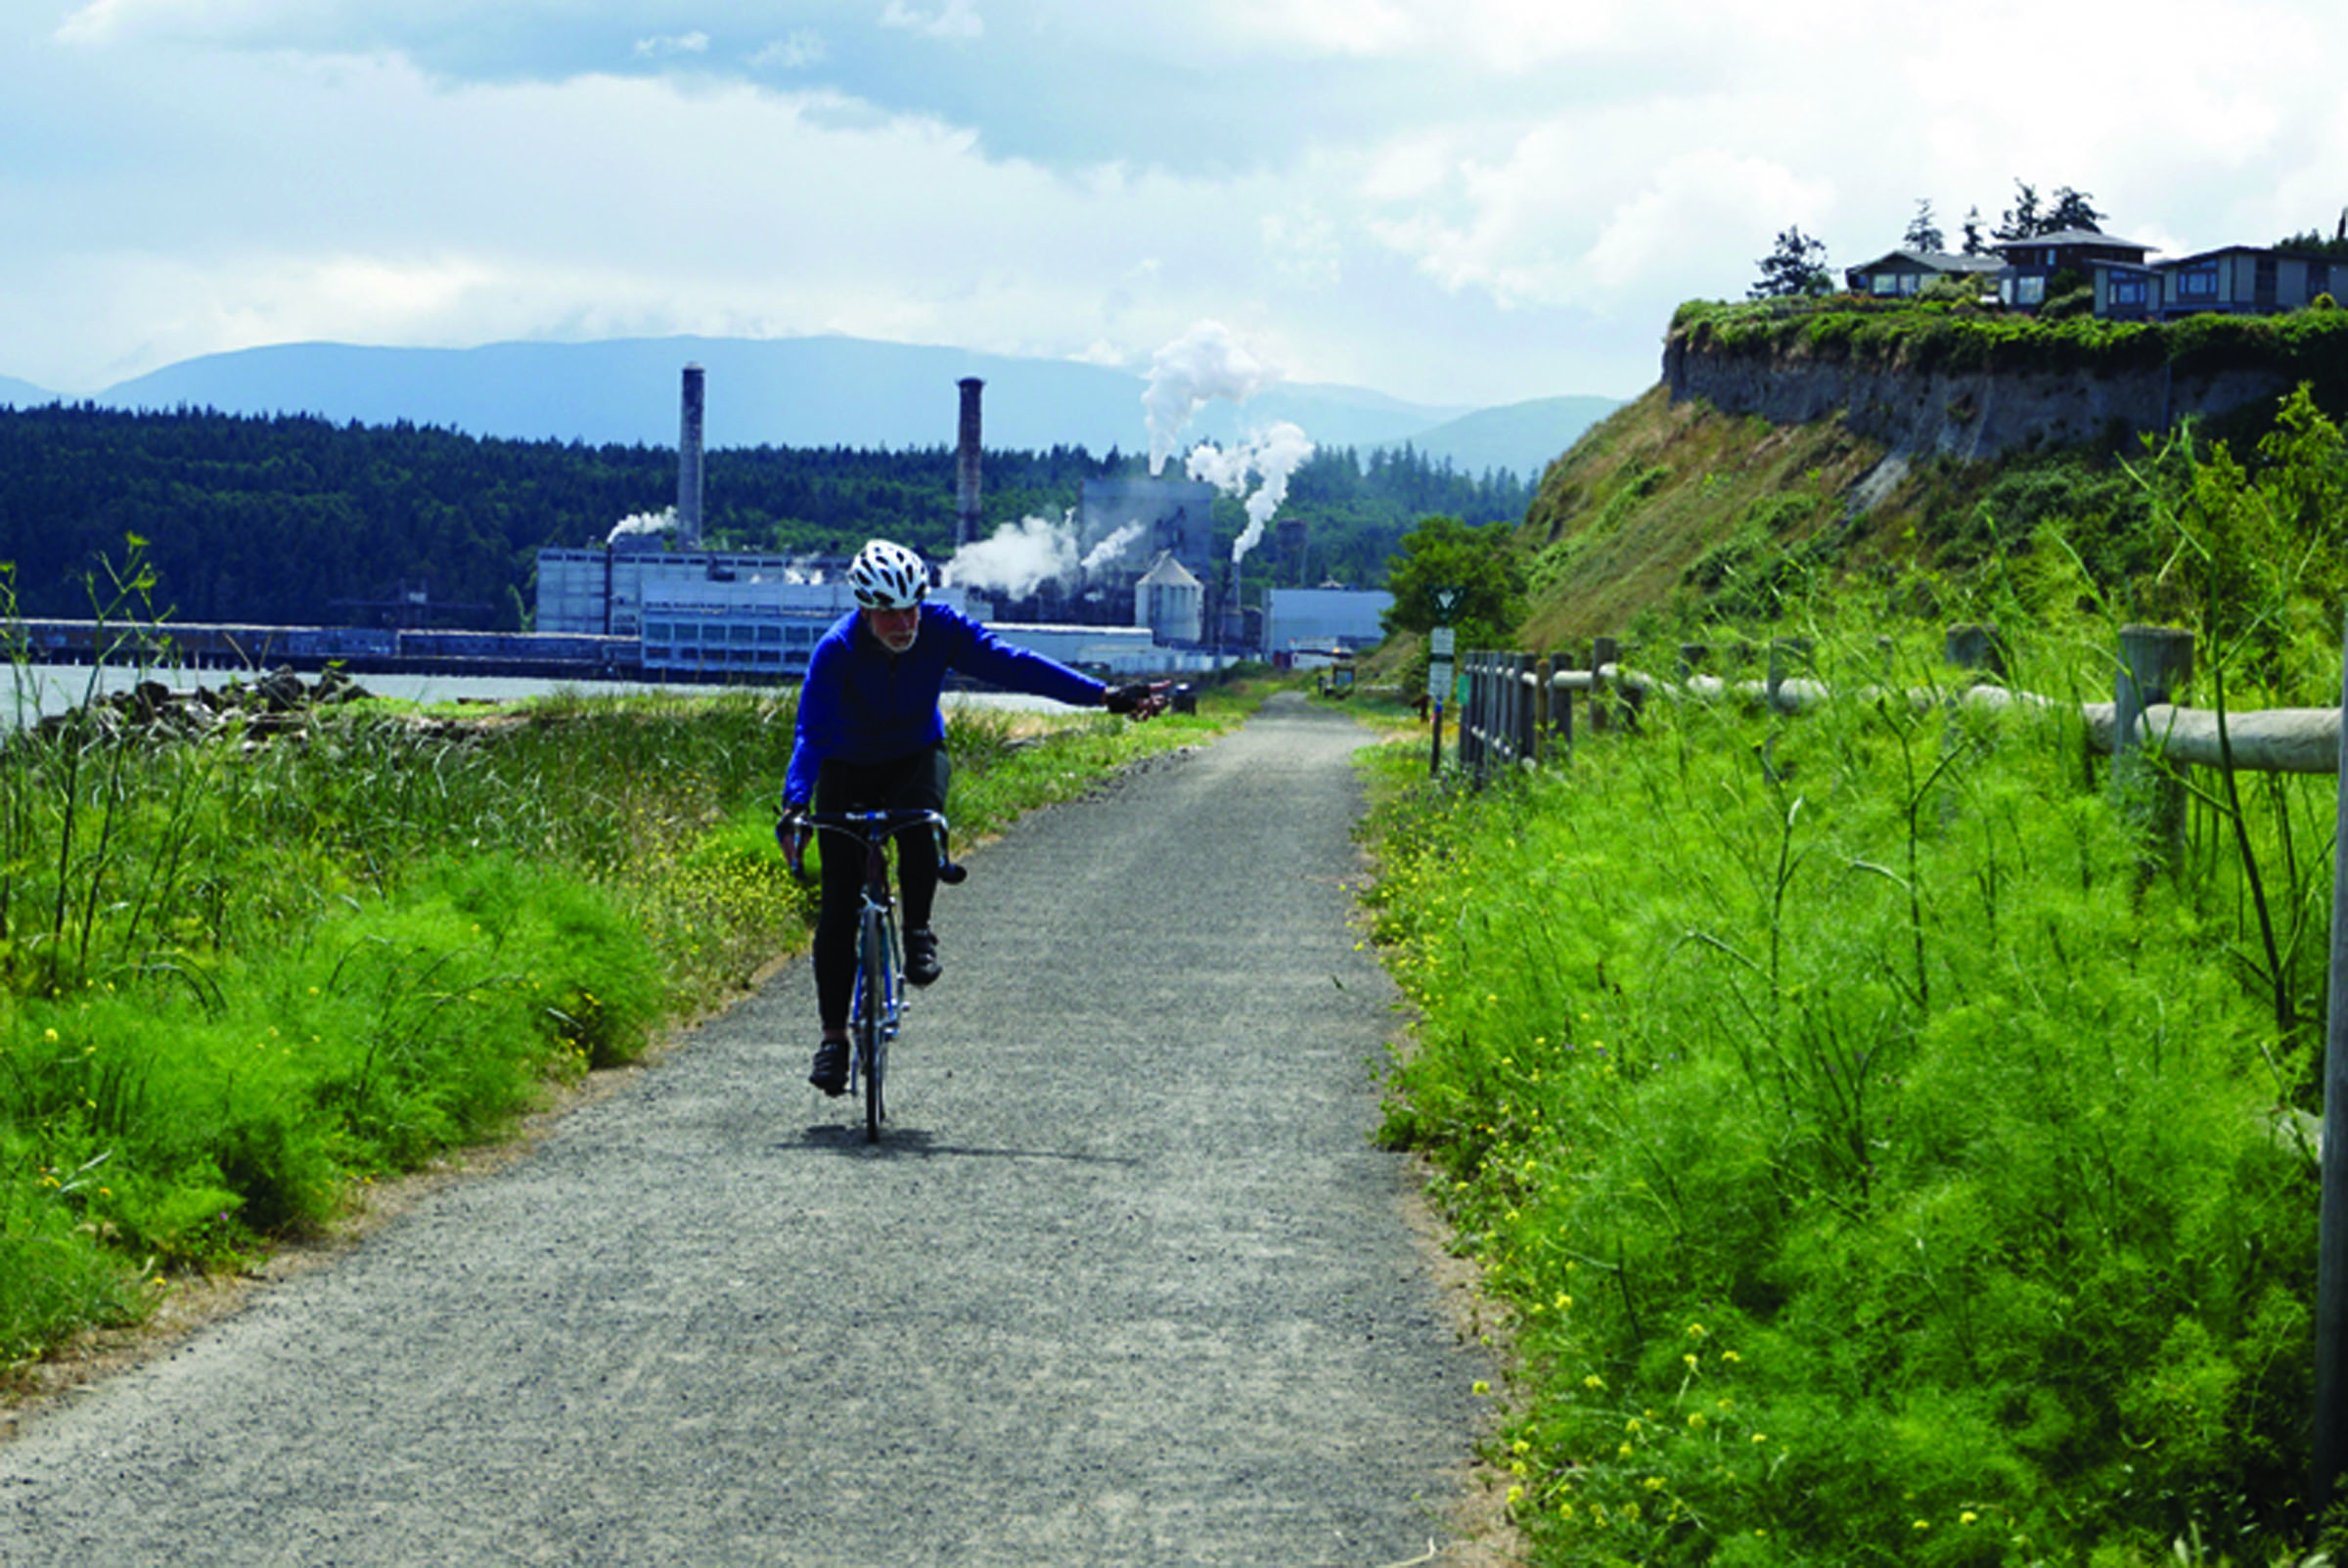 Phil Walkden of Port Townsend takes a spin on the Larry Scott Trail on Thursday. The Longest Day of Trails race on Saturday is for runners and walkers only. (Charlie Bermant/Peninsula Daily News)